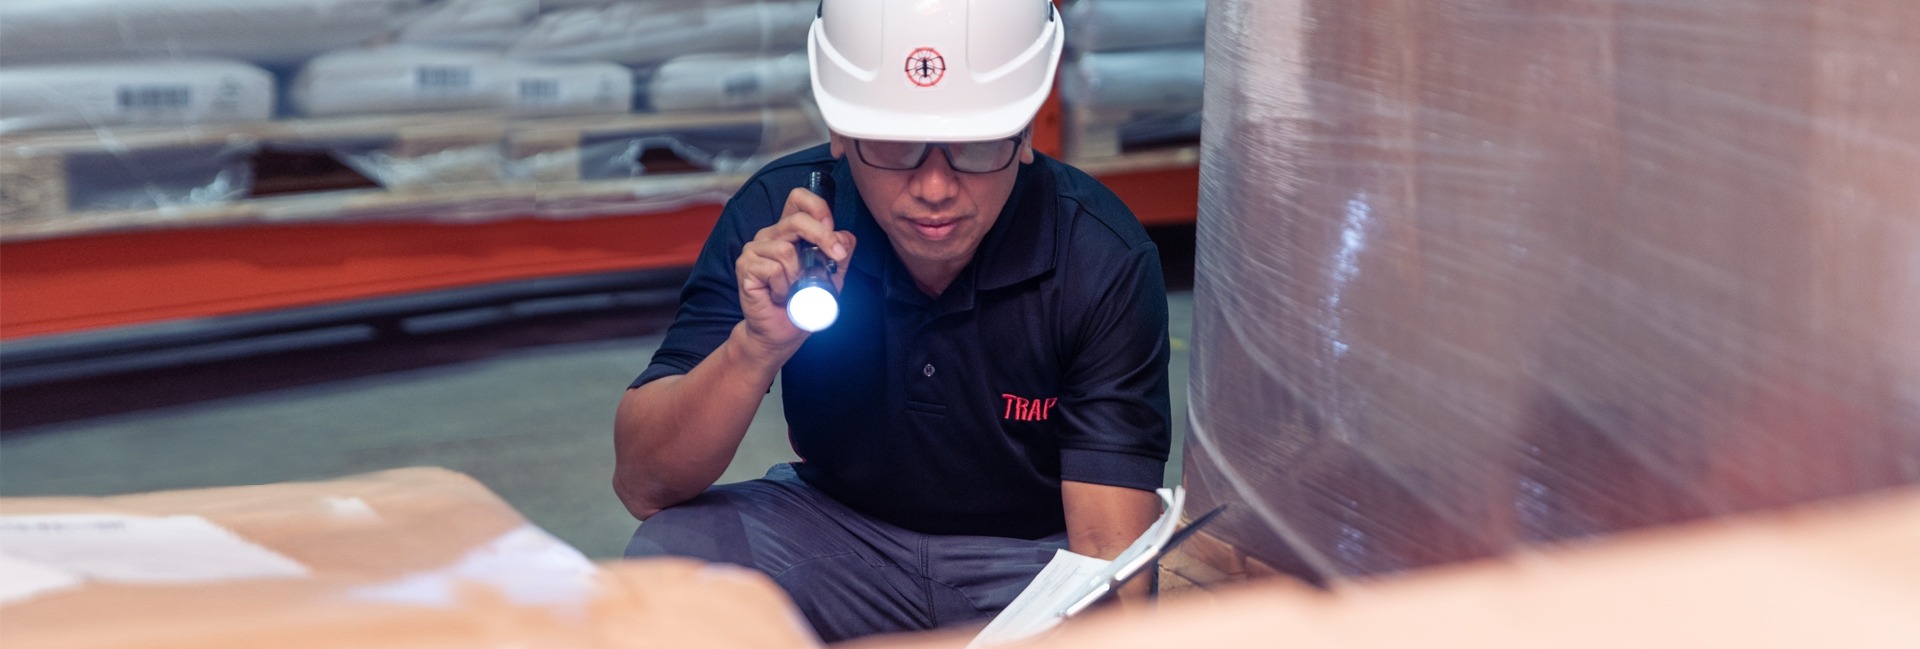 A TRAP pest control employee holding a flashlight inspecting a factory